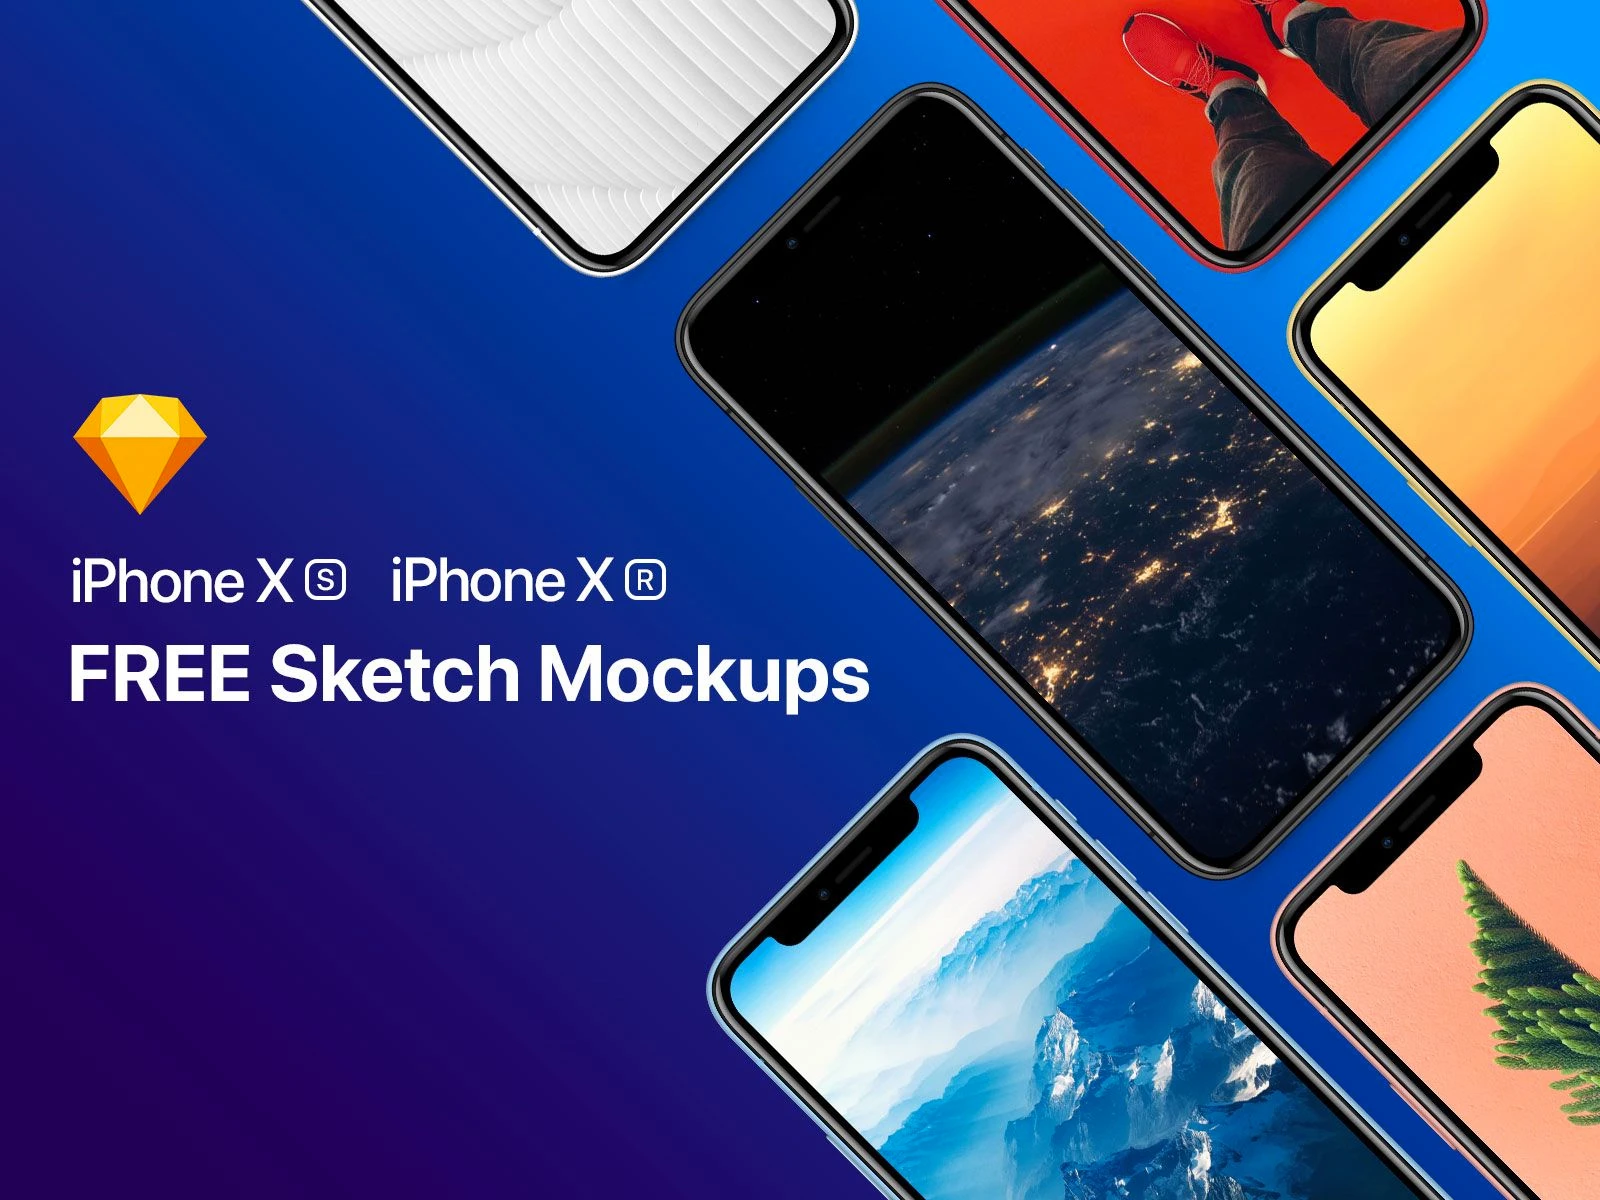 iPhone Xr, Xs and Xs Max Mockups - These fully vector sketch files have been carefully crafted to ensure the quality of your own designs and presentations. The Pen Pals iPhone sketch templates are very easy to edit and in well organized groups.